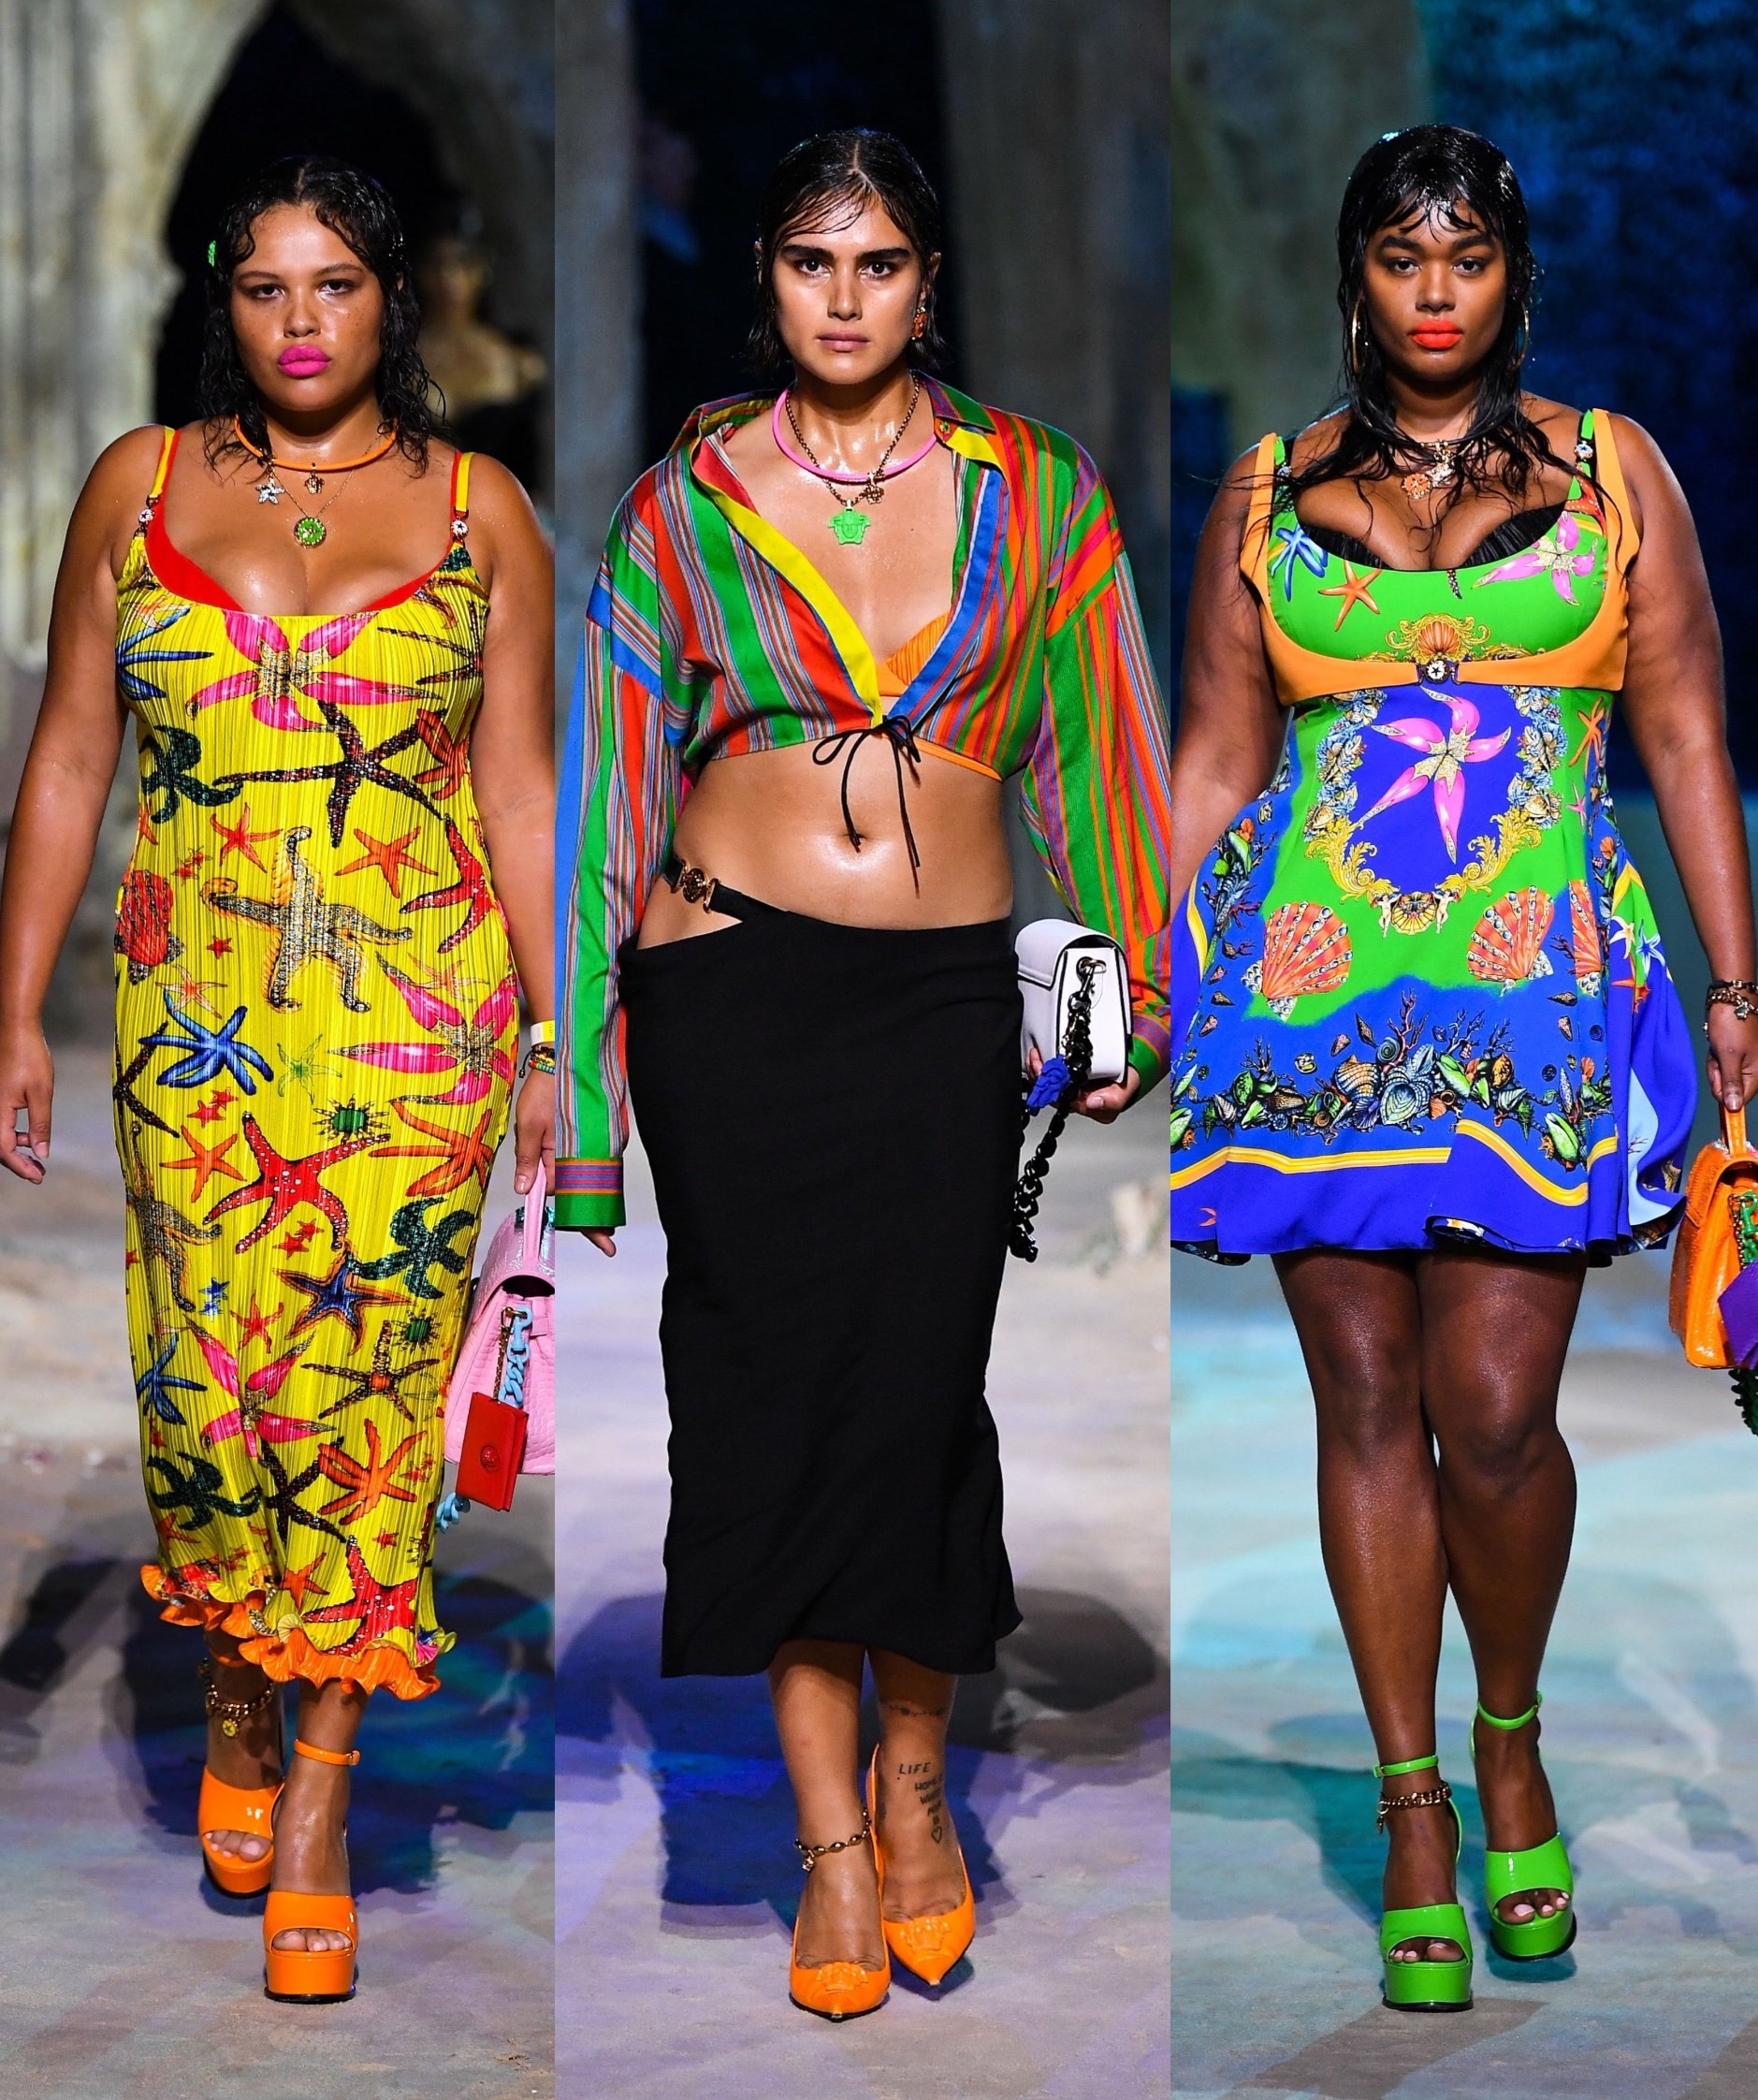 Three plus-size models just made fashion history at Versace Womenswear